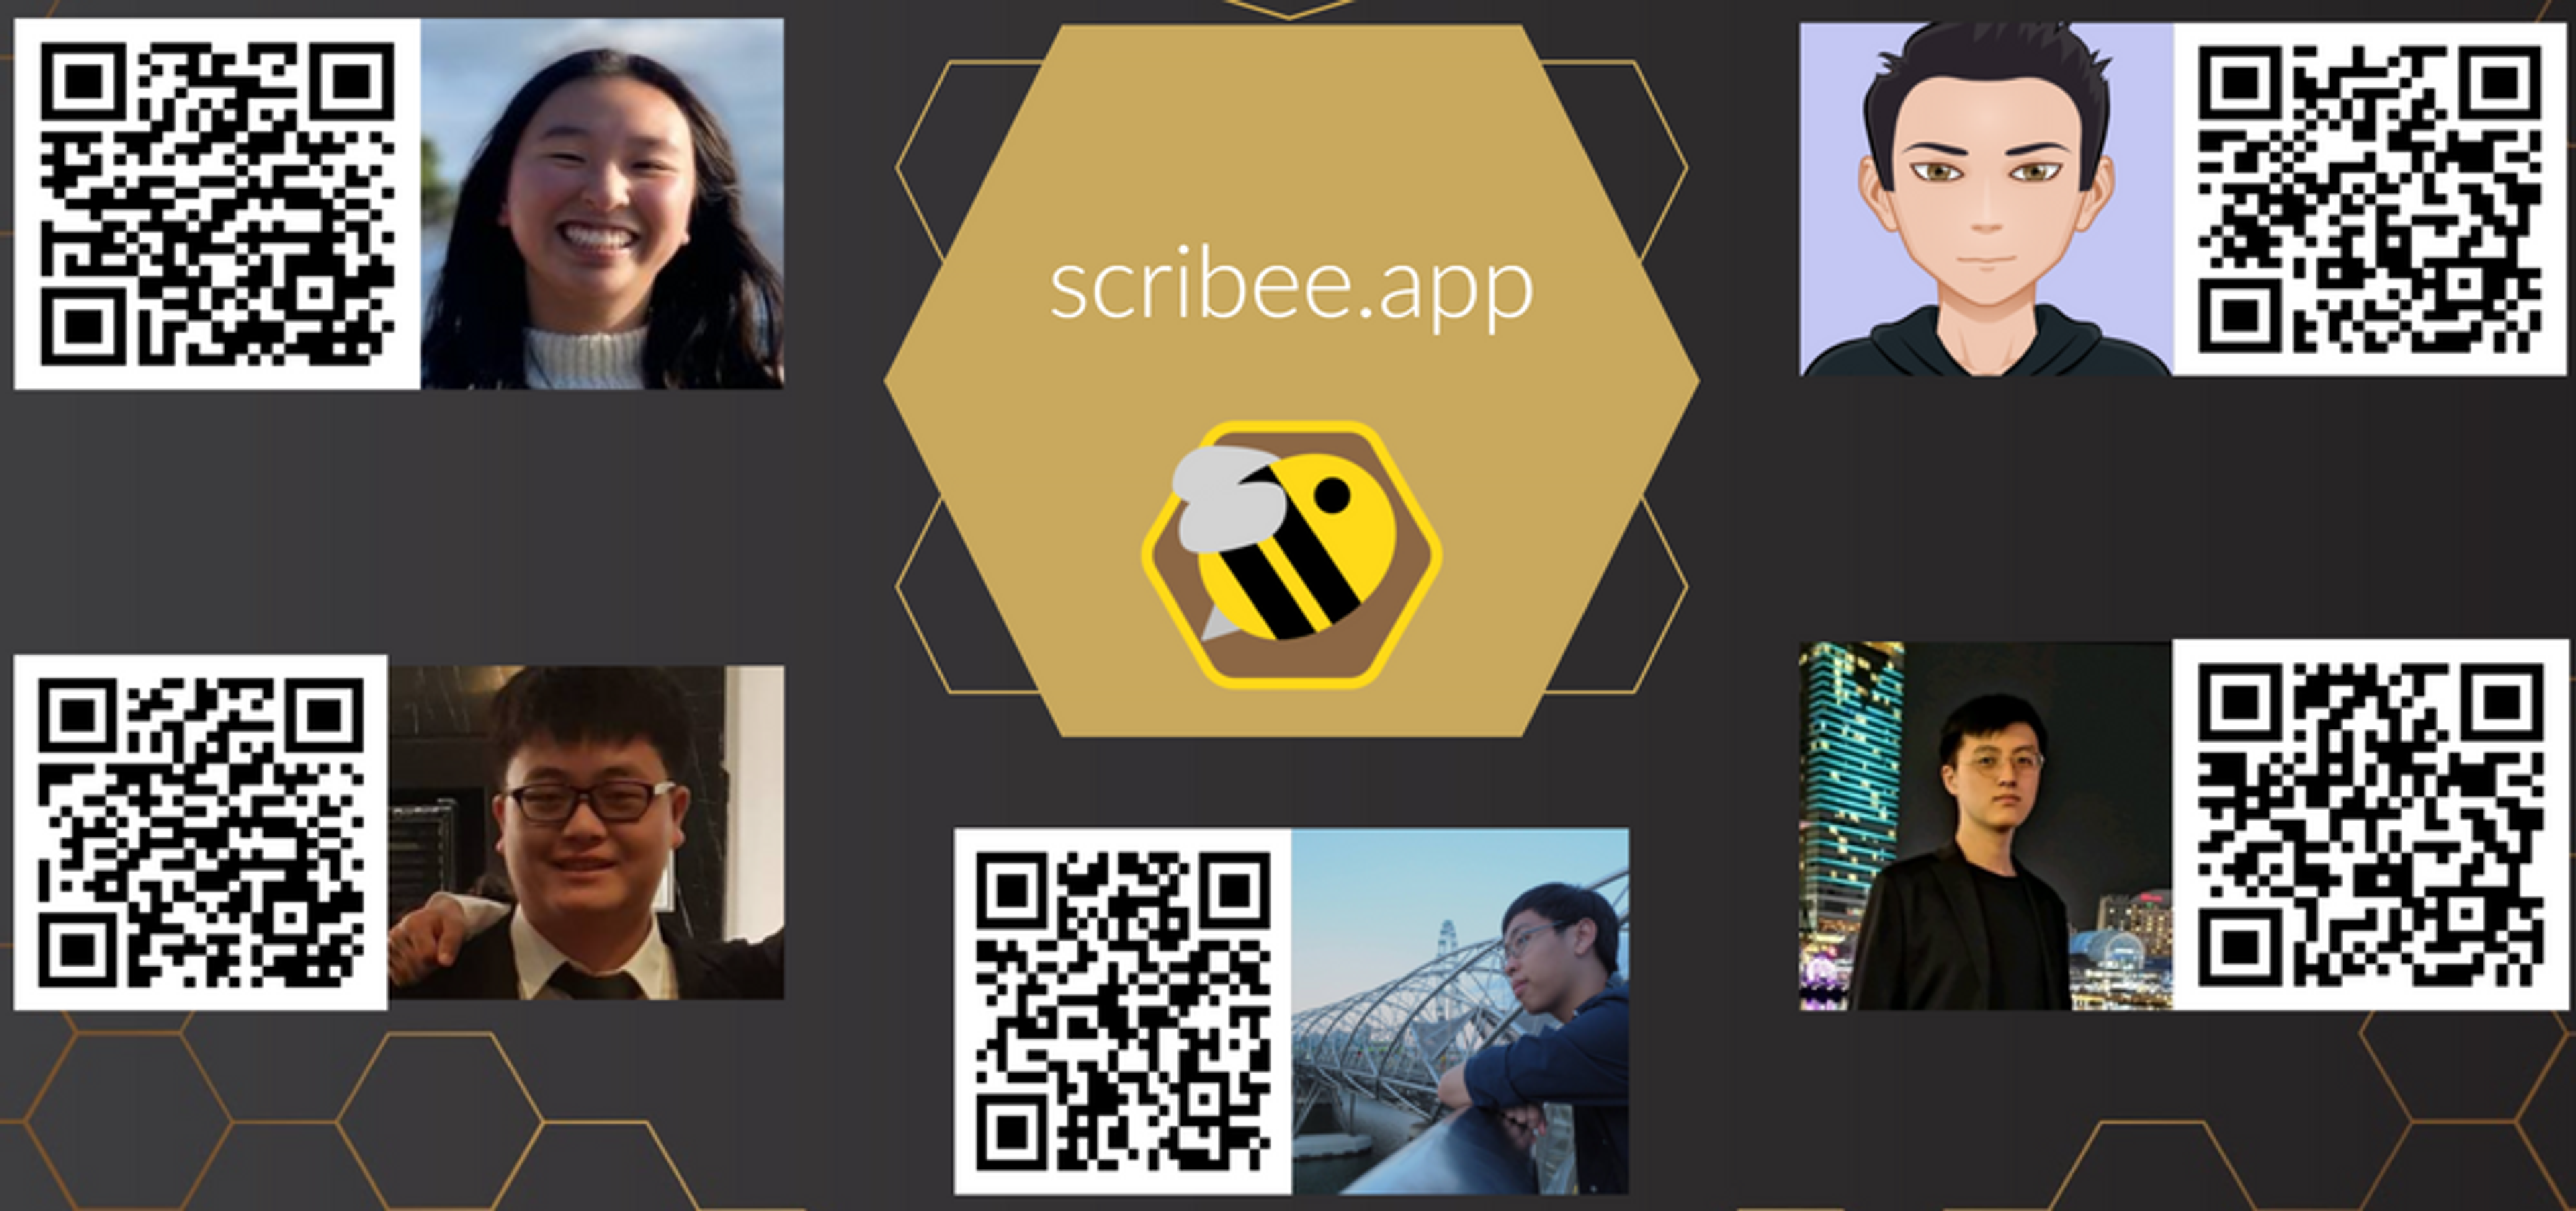 Scribee pitch final slide thank you